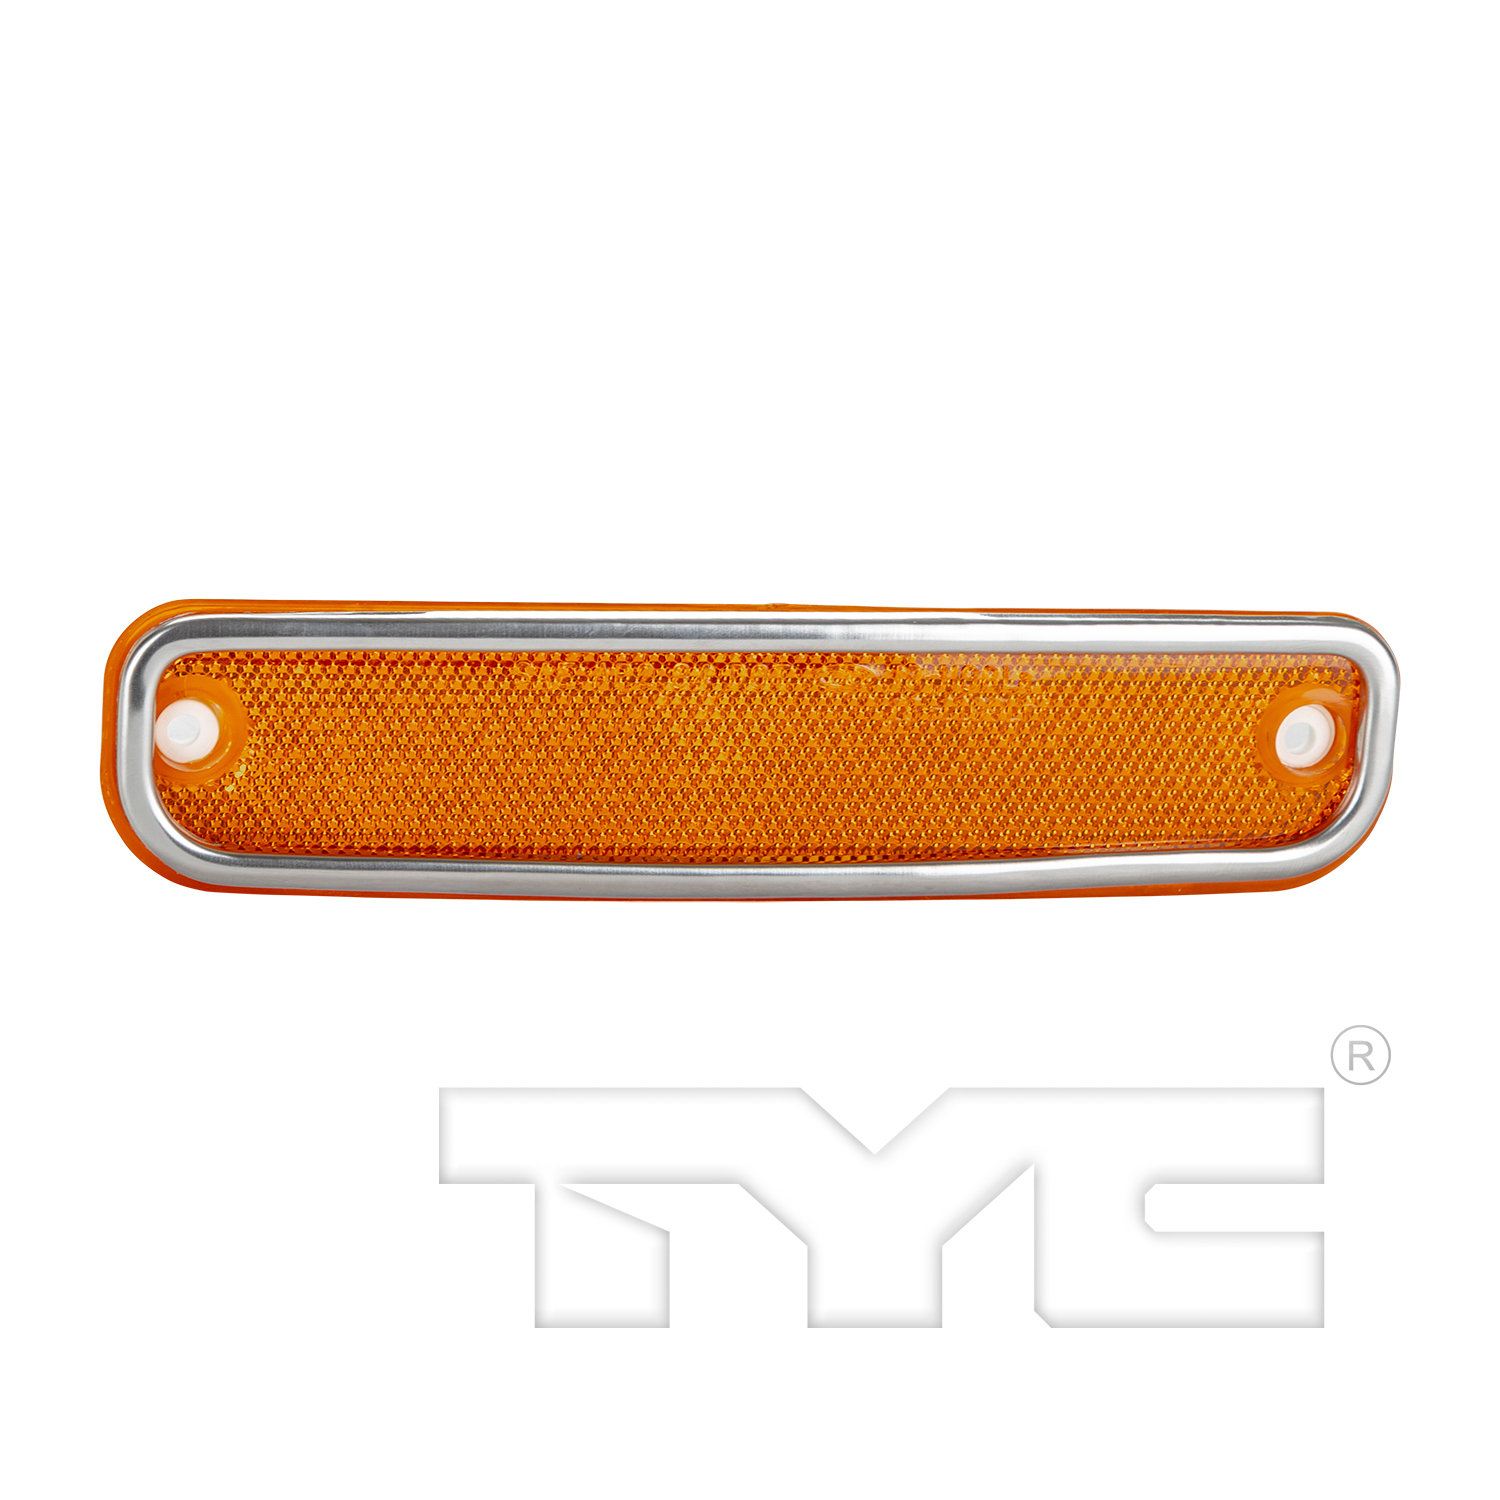 Aftermarket LAMPS for CHEVROLET - C20 SUBURBAN, C20 SUBURBAN,73-80,RT Front marker lamp assy